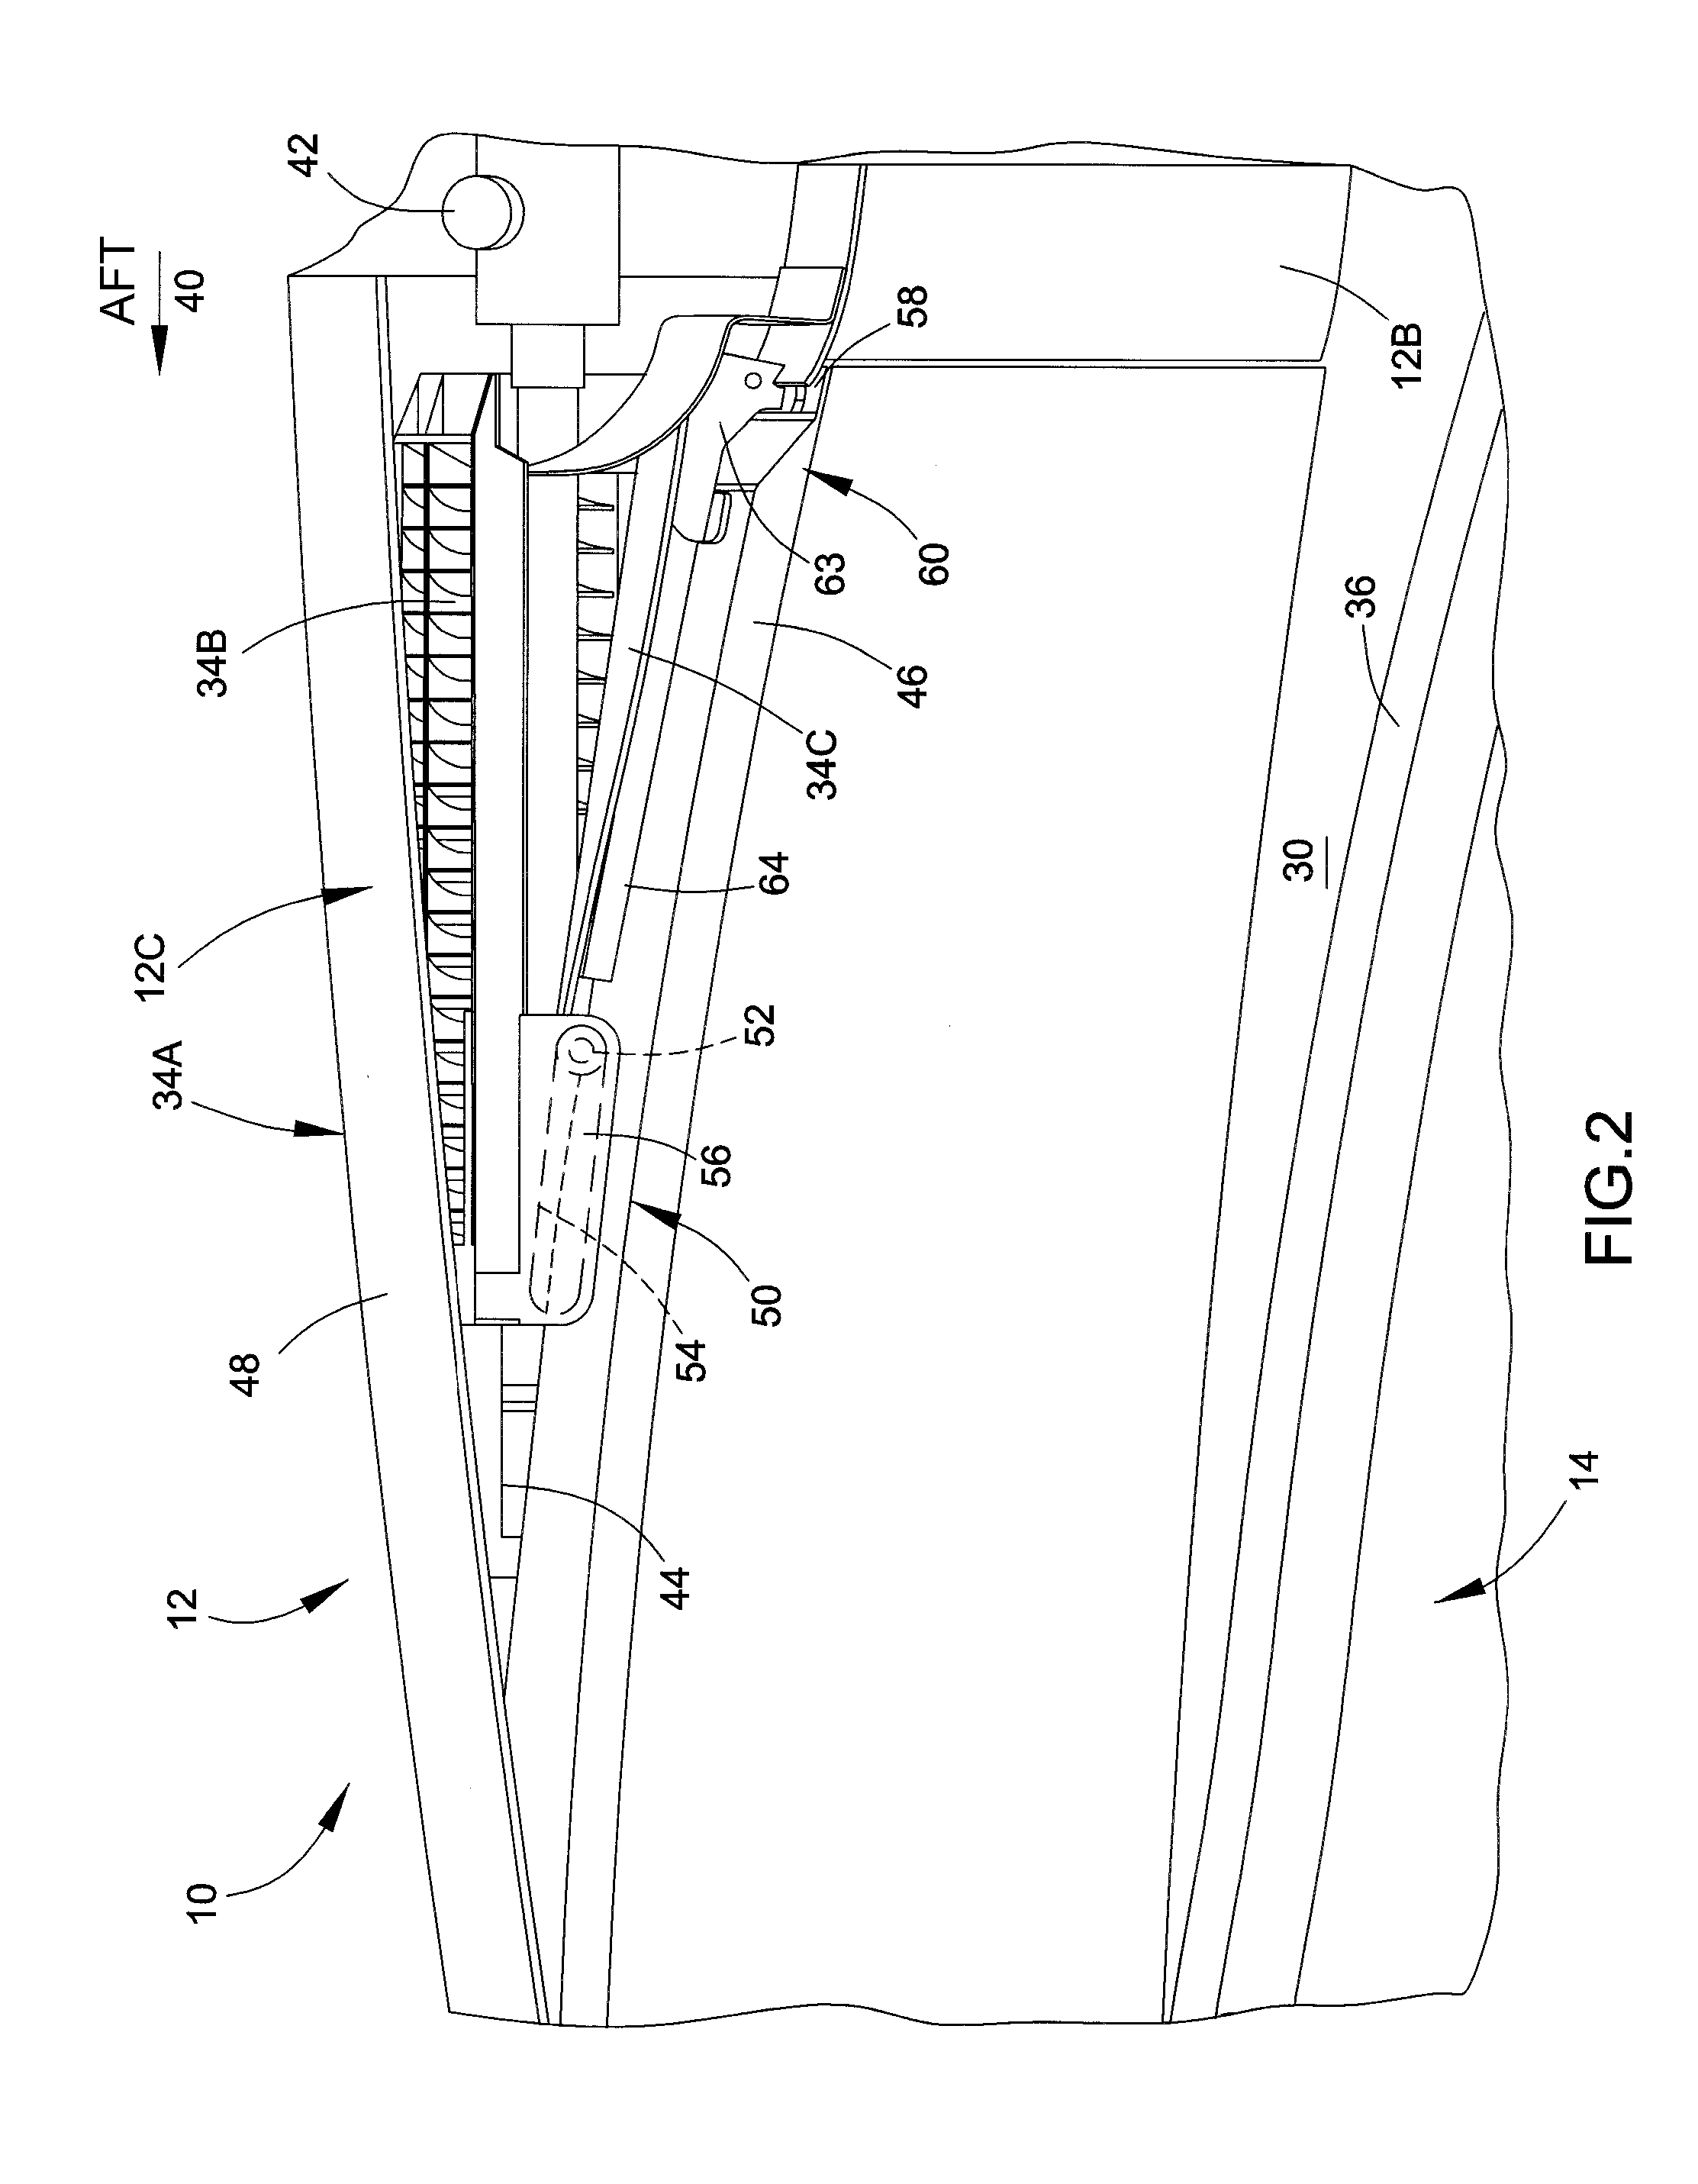 Thrust reverser assembly and method of operation